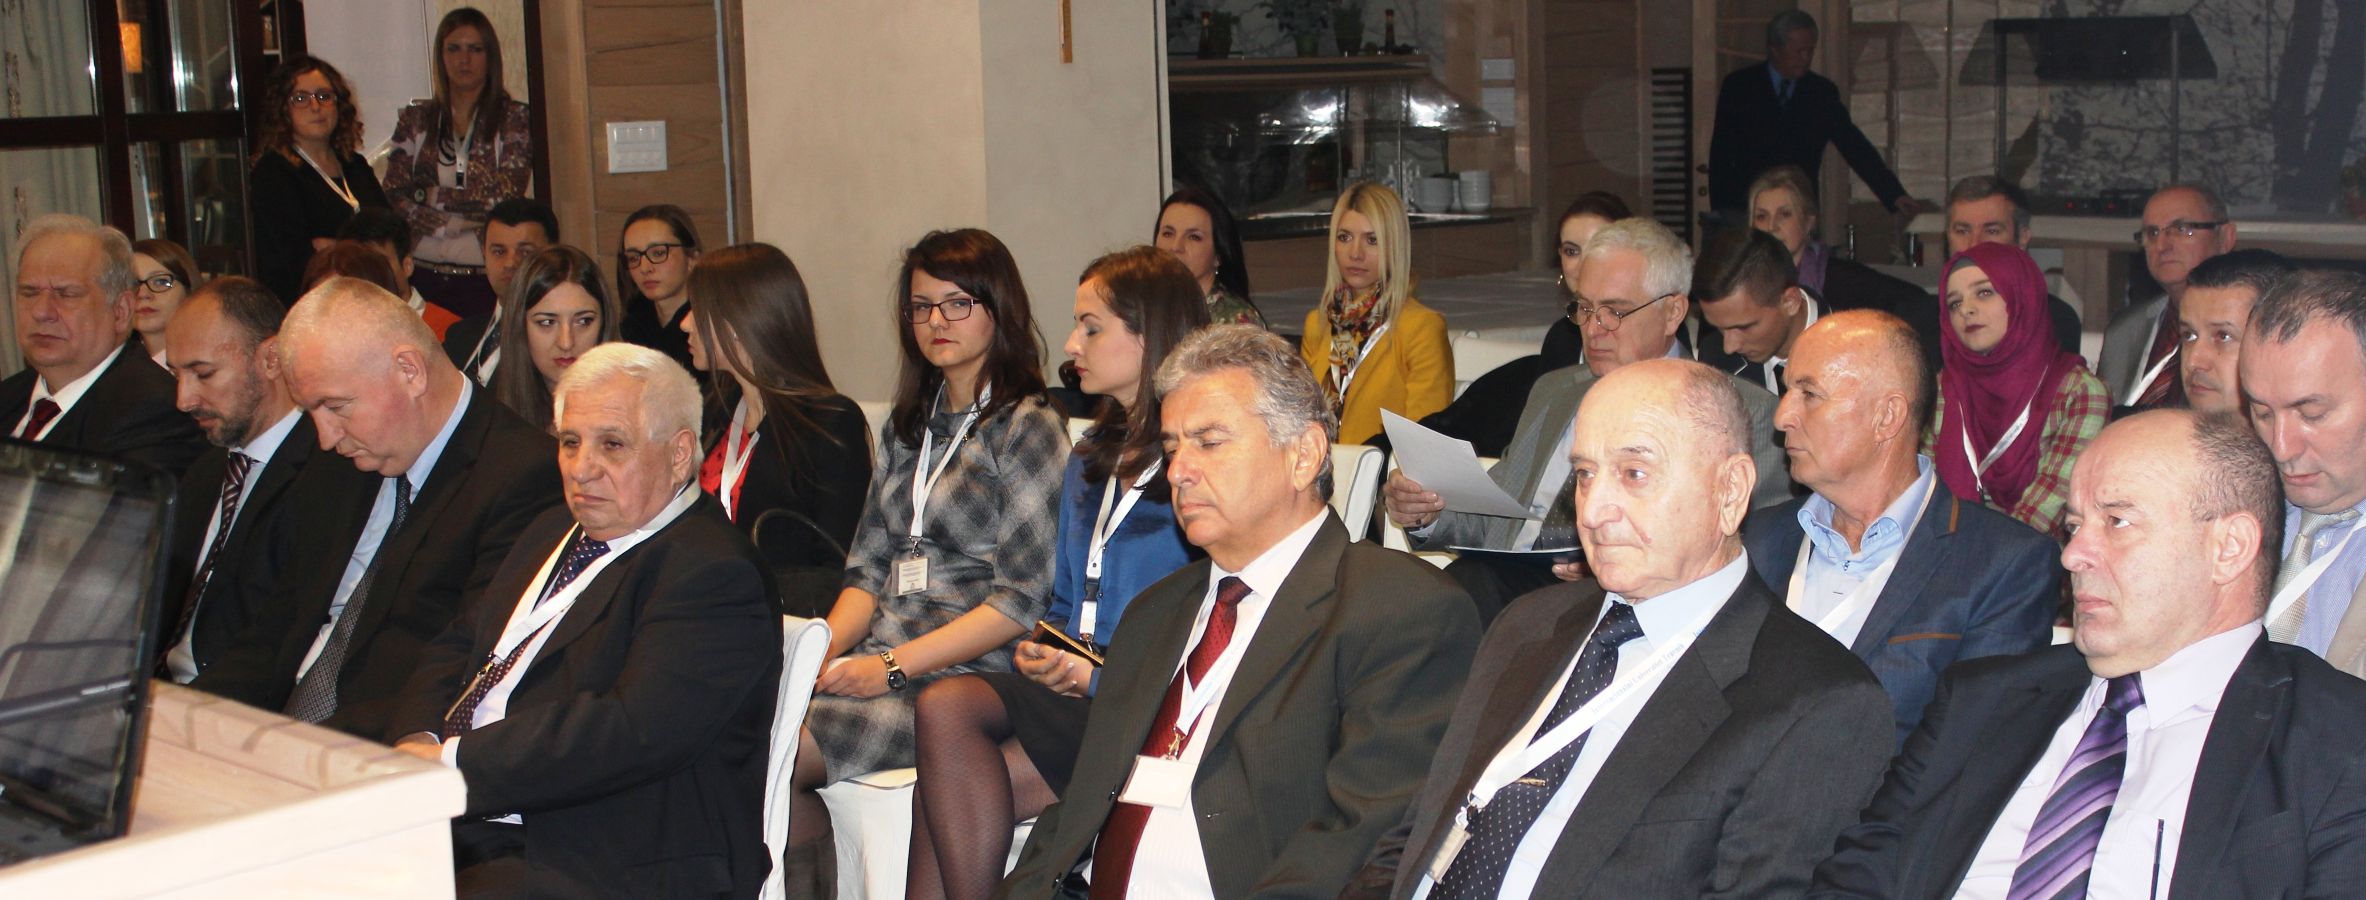 International University Travnik Organized The XII International Conference “Transitional Challenges In Bosnia And Herzegovina And The Western Balkans Countries With Legal, Economic And Communication Aspects”